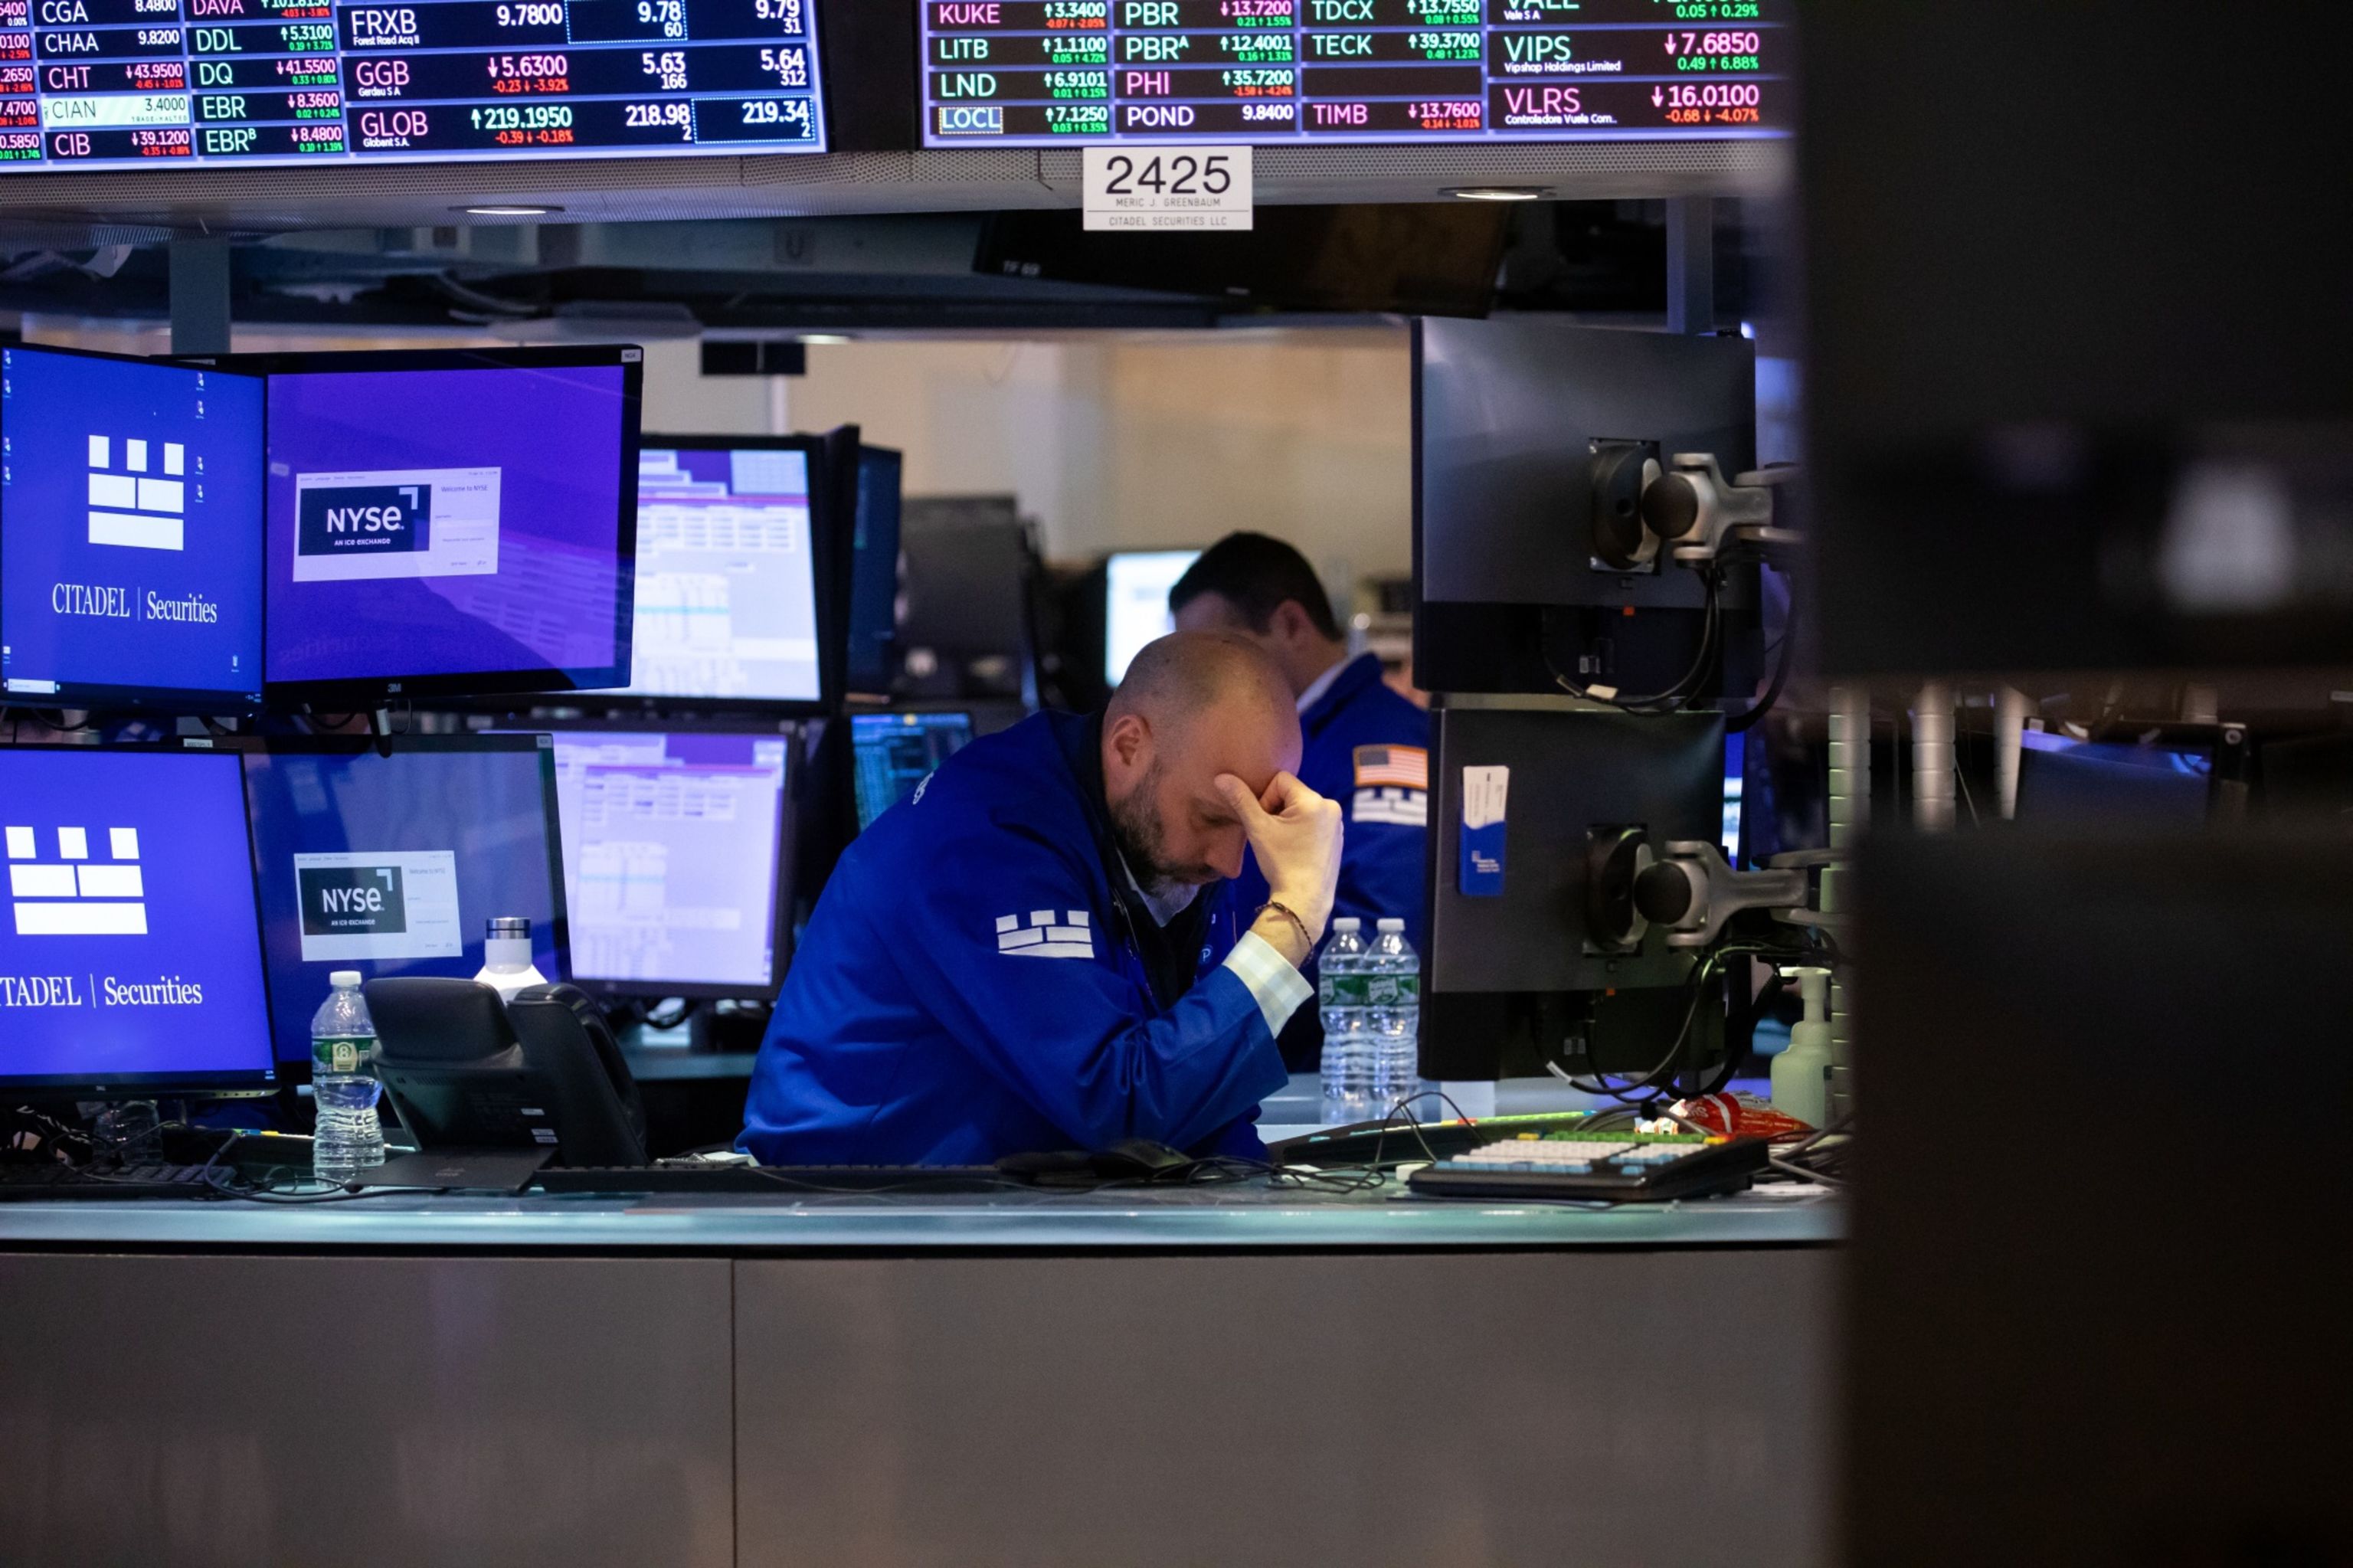 A trader on the New York Stock Exchange.